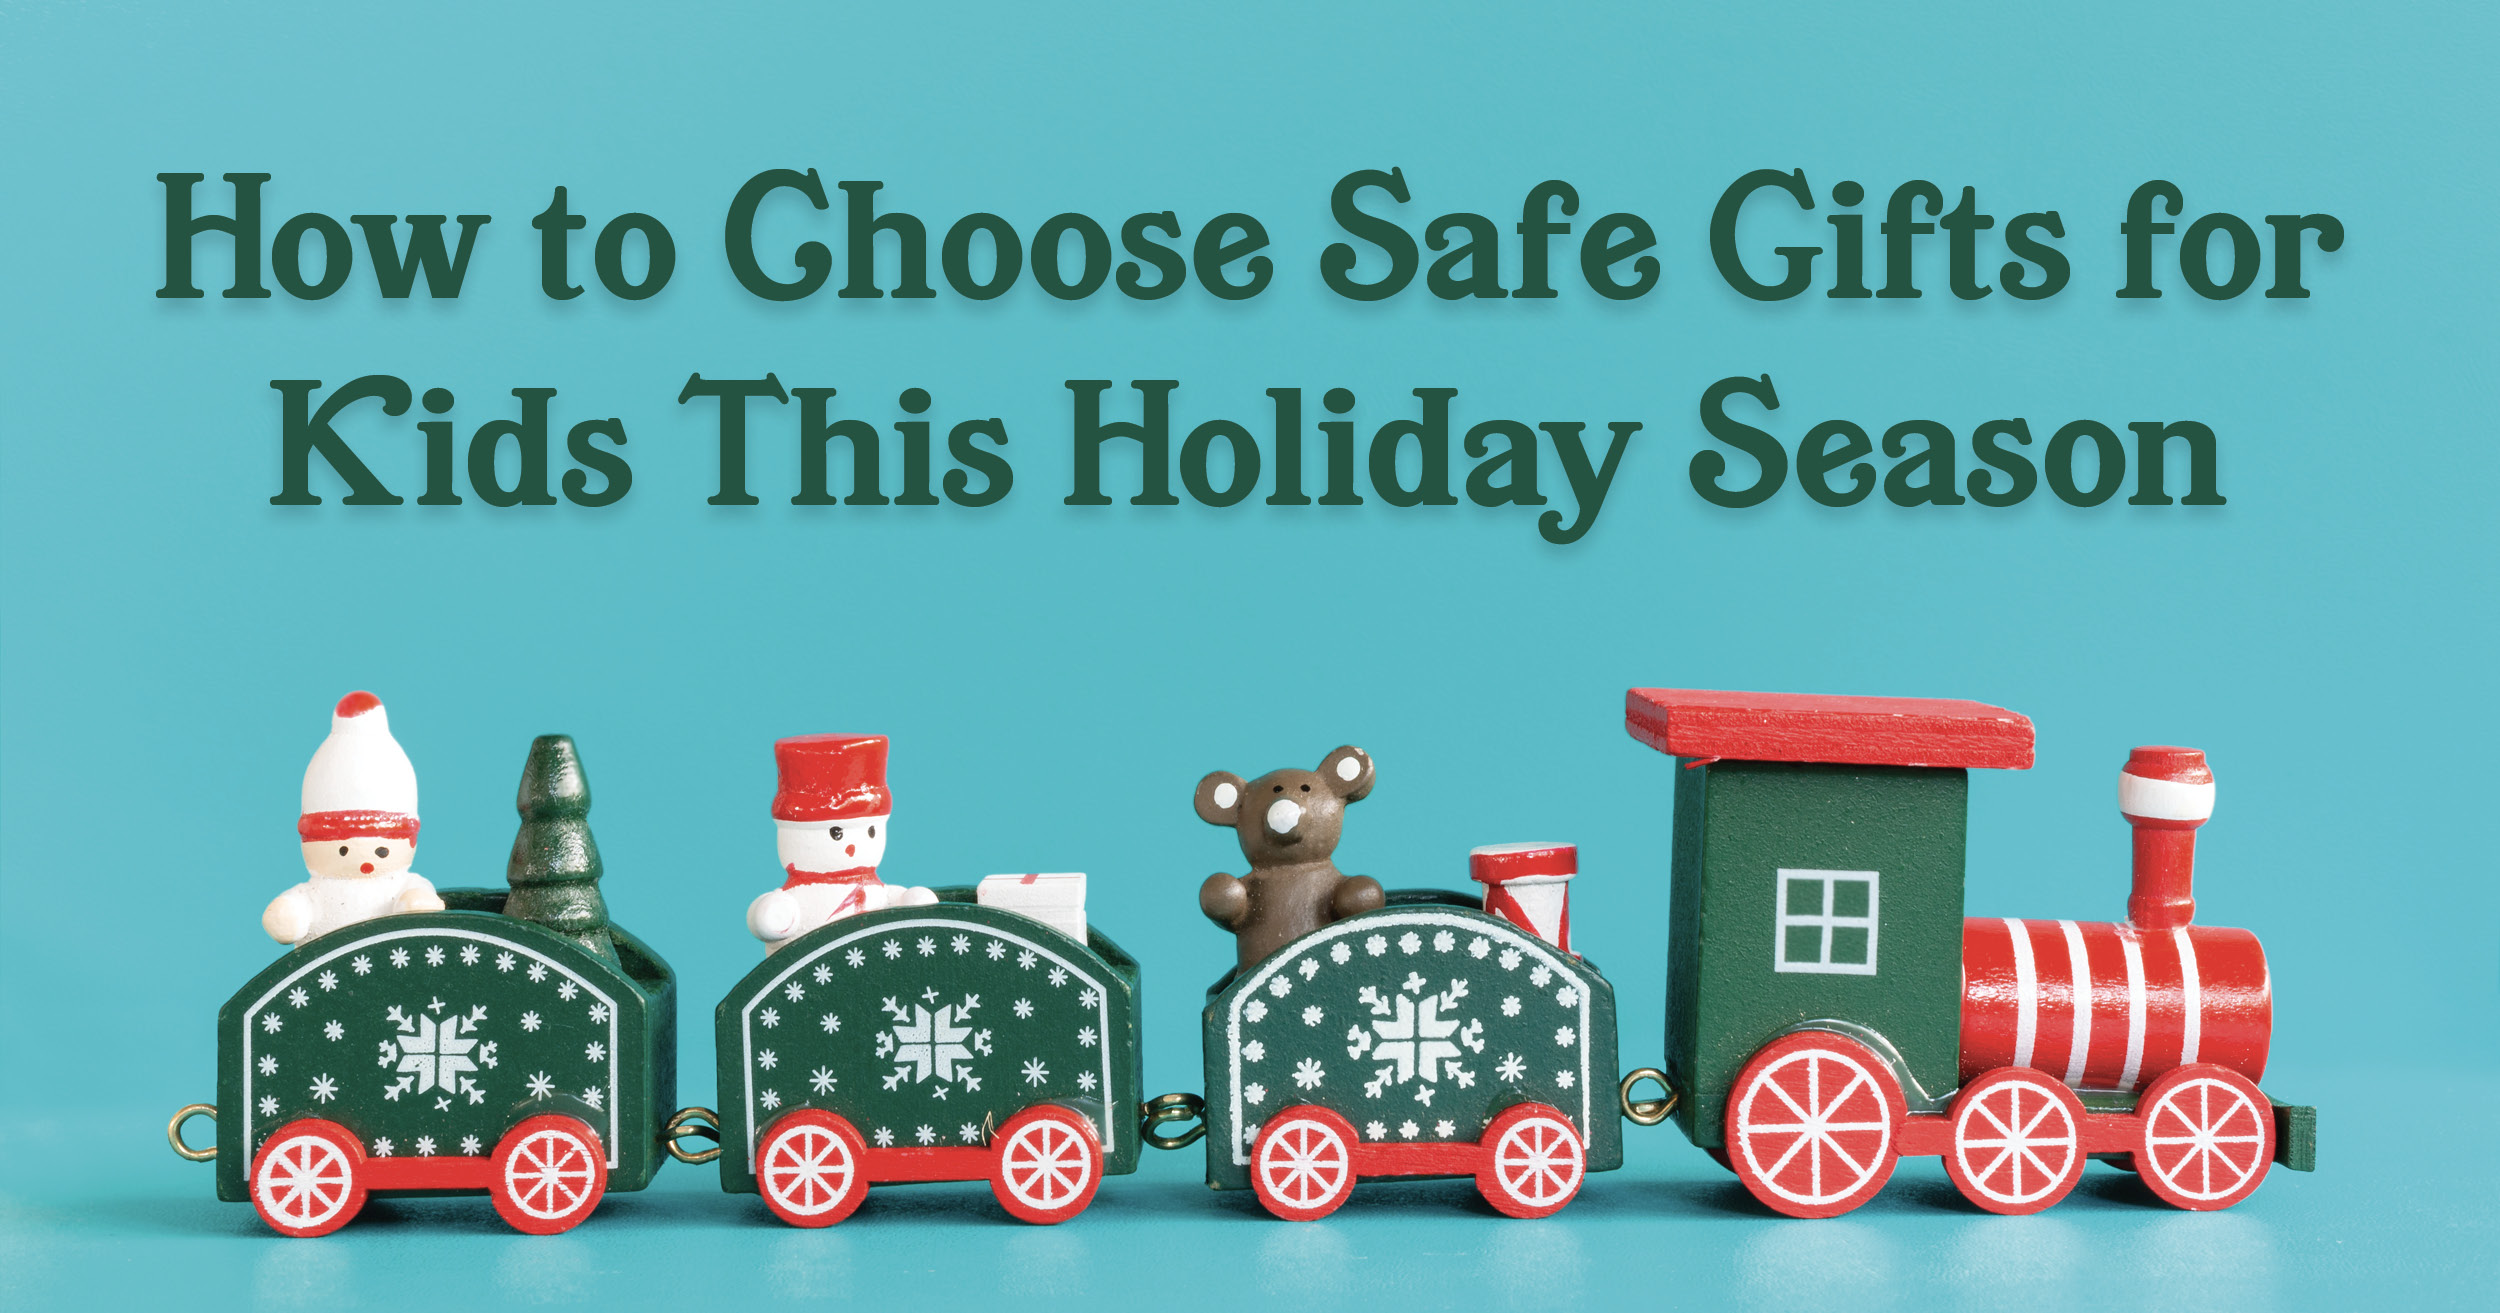 How to Choose Safe Gifts for Kids This Holiday Season